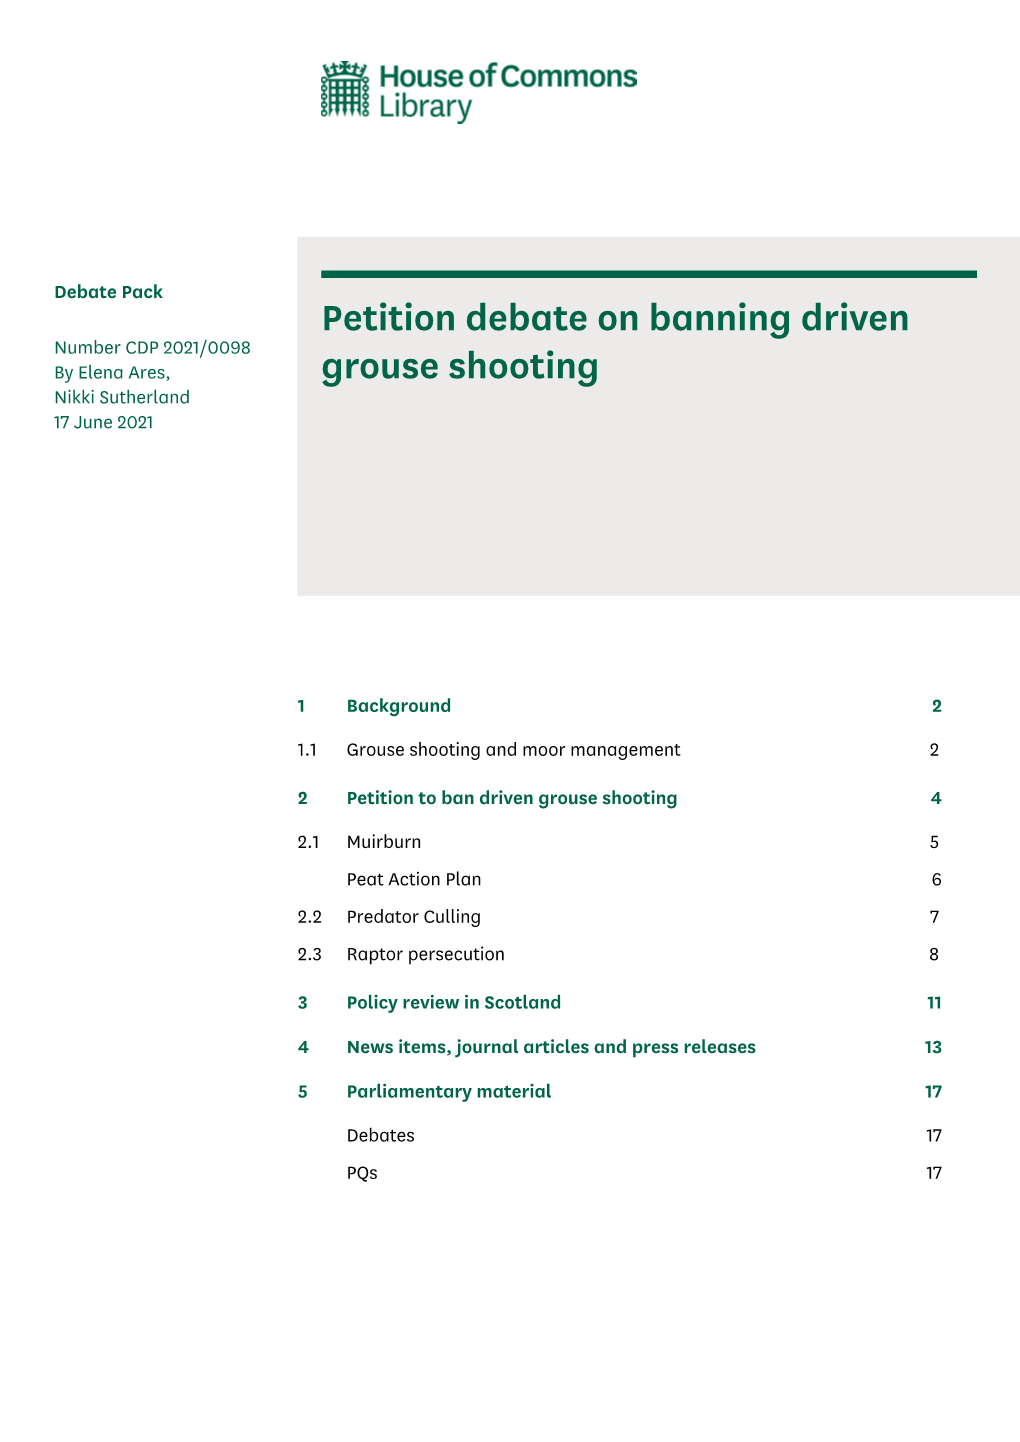 Petition Debate on Banning Driven Grouse Shooting